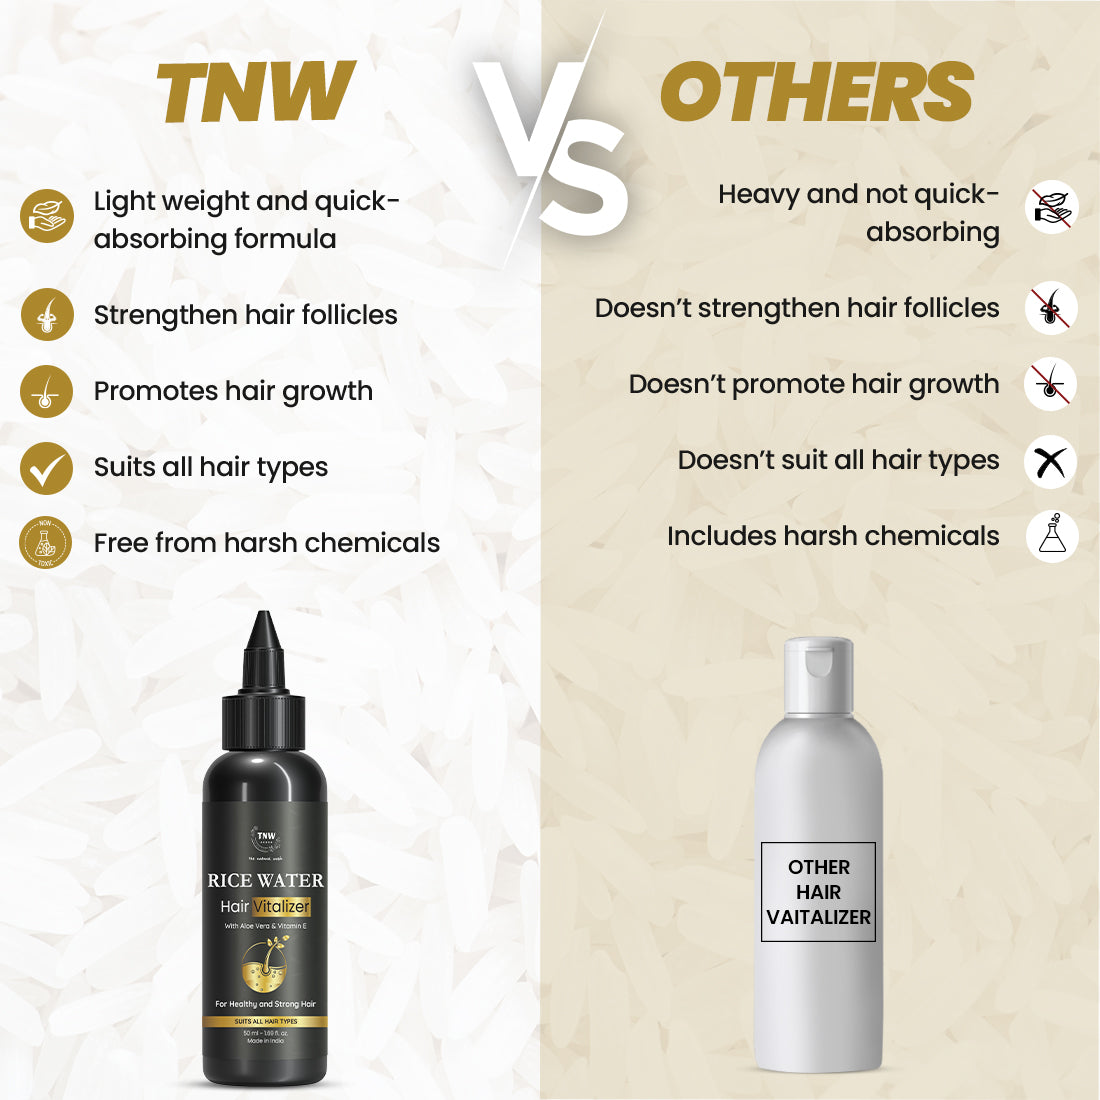 TNW Hair Vitalizer Vs Others